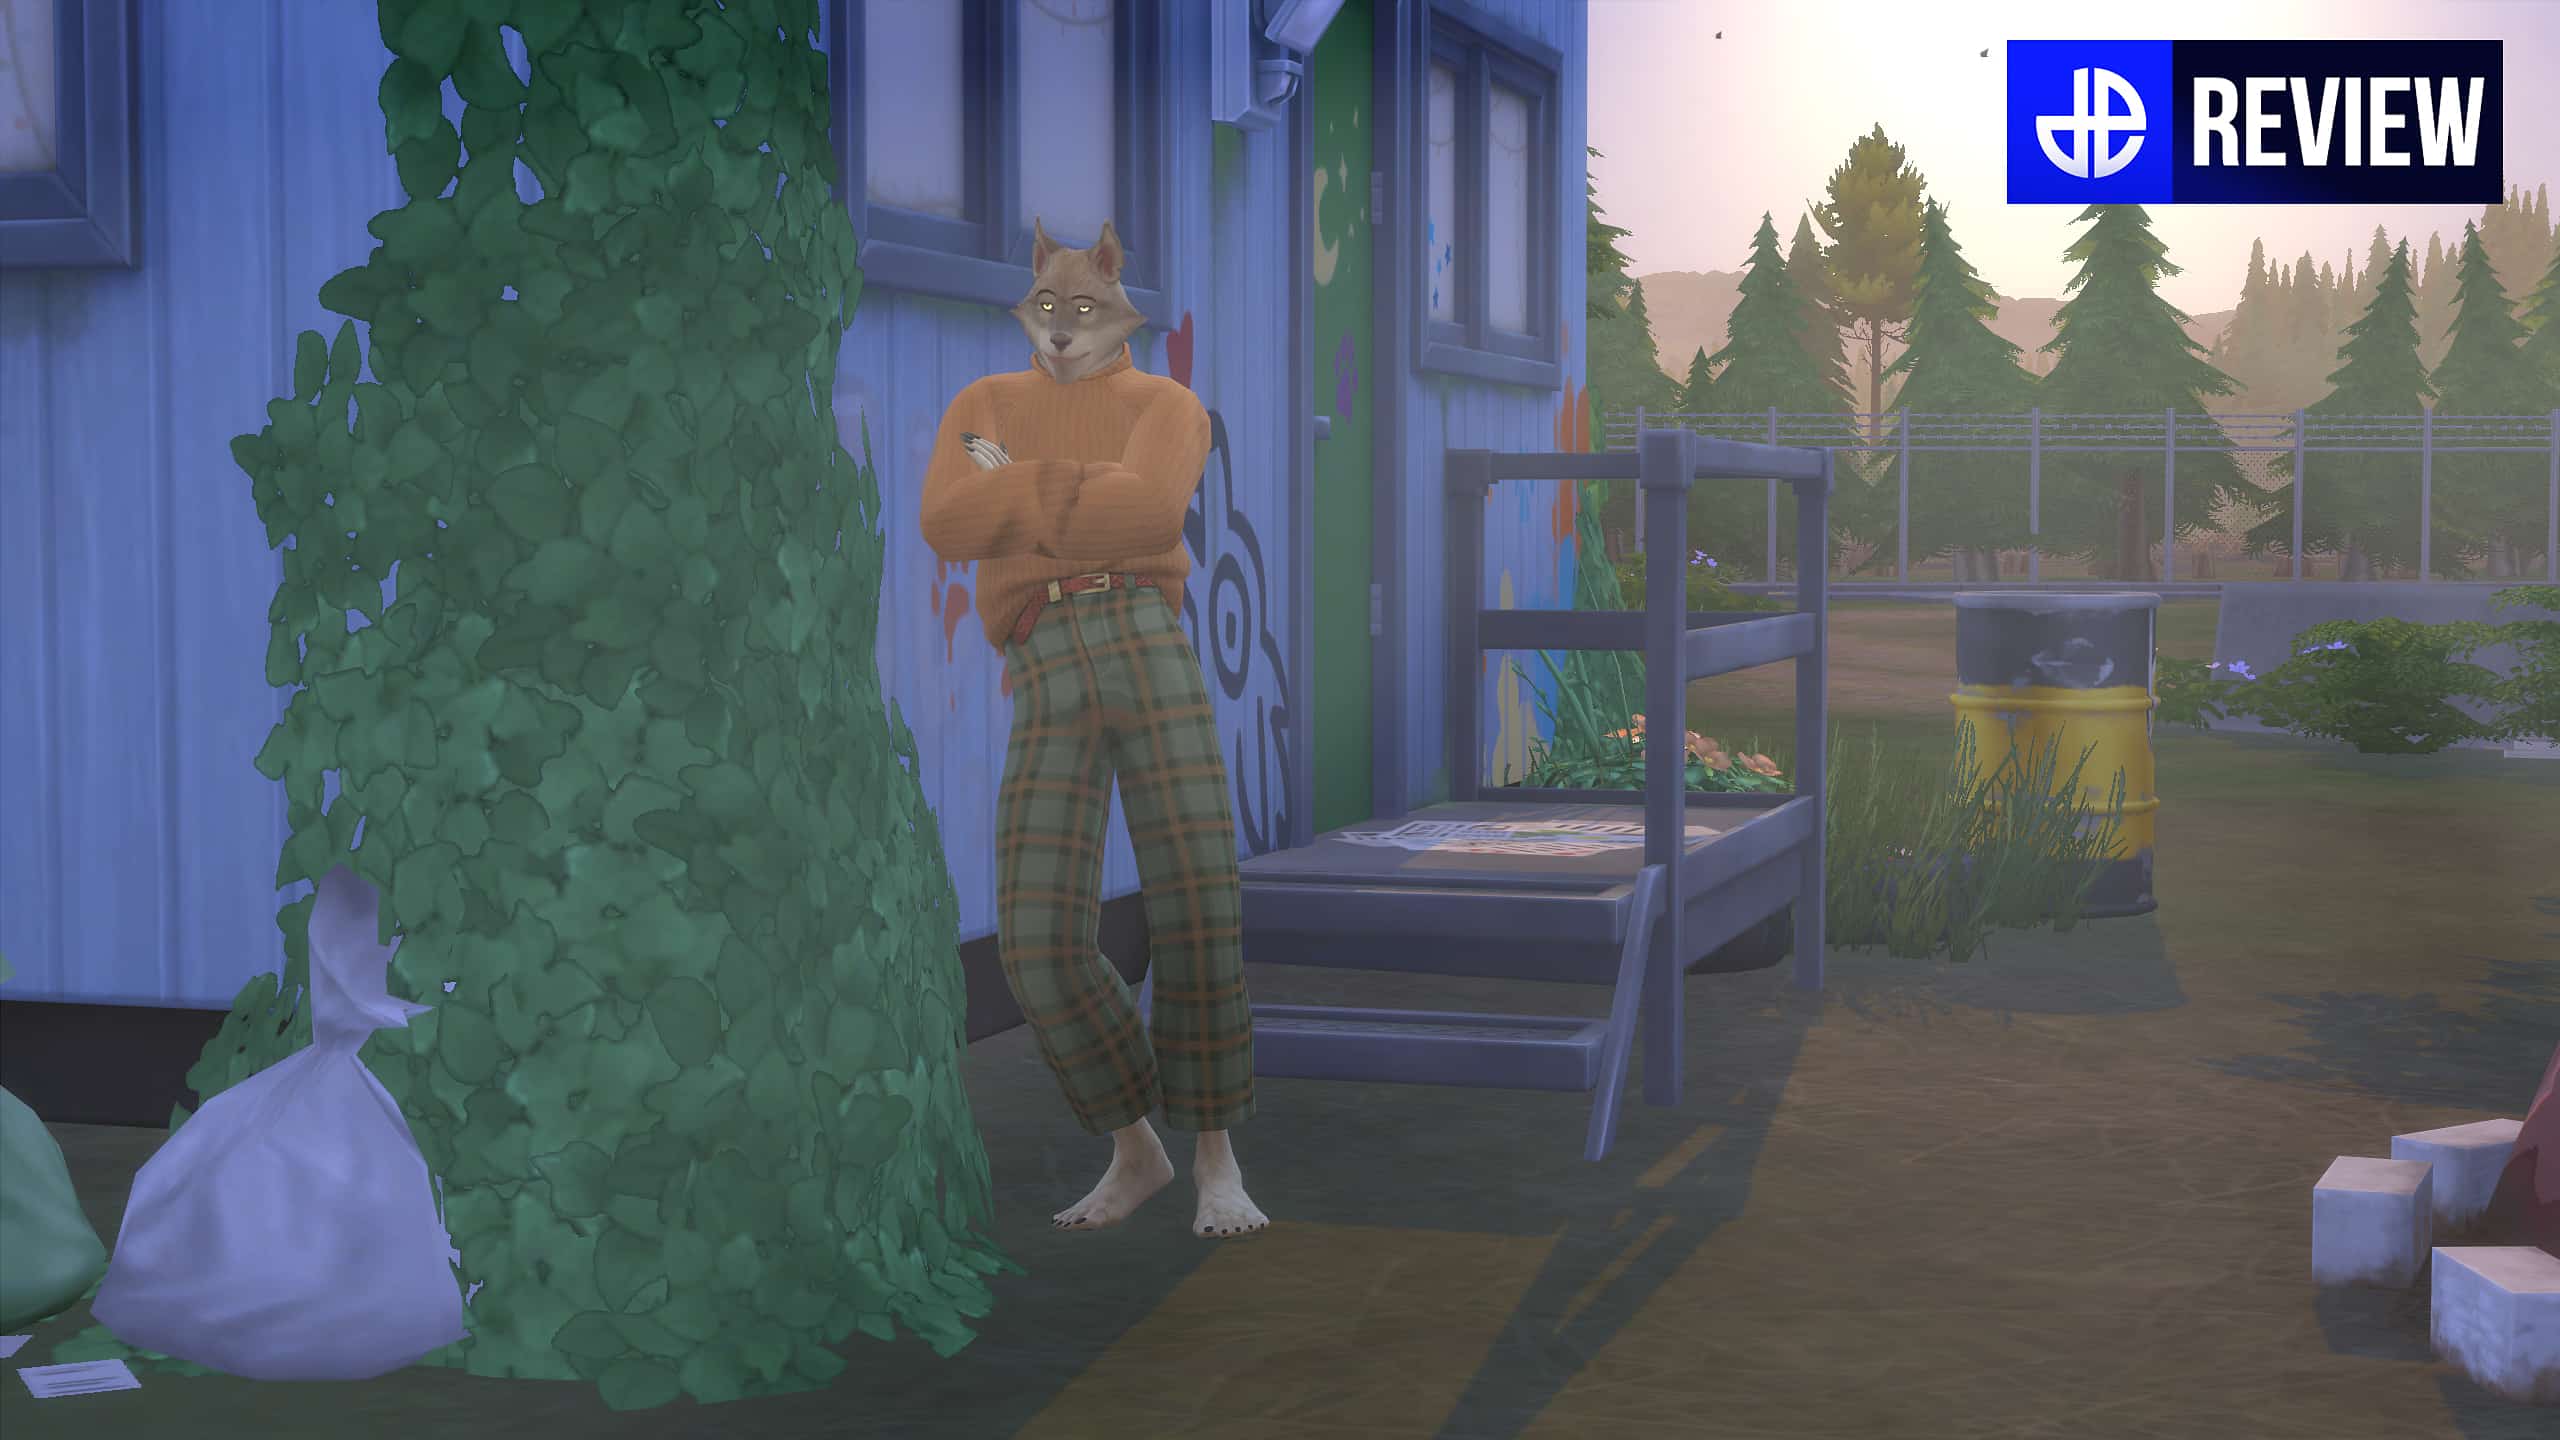 An image of werewolves hanging out at the Wildfangs Pack hangout in The Sims 4